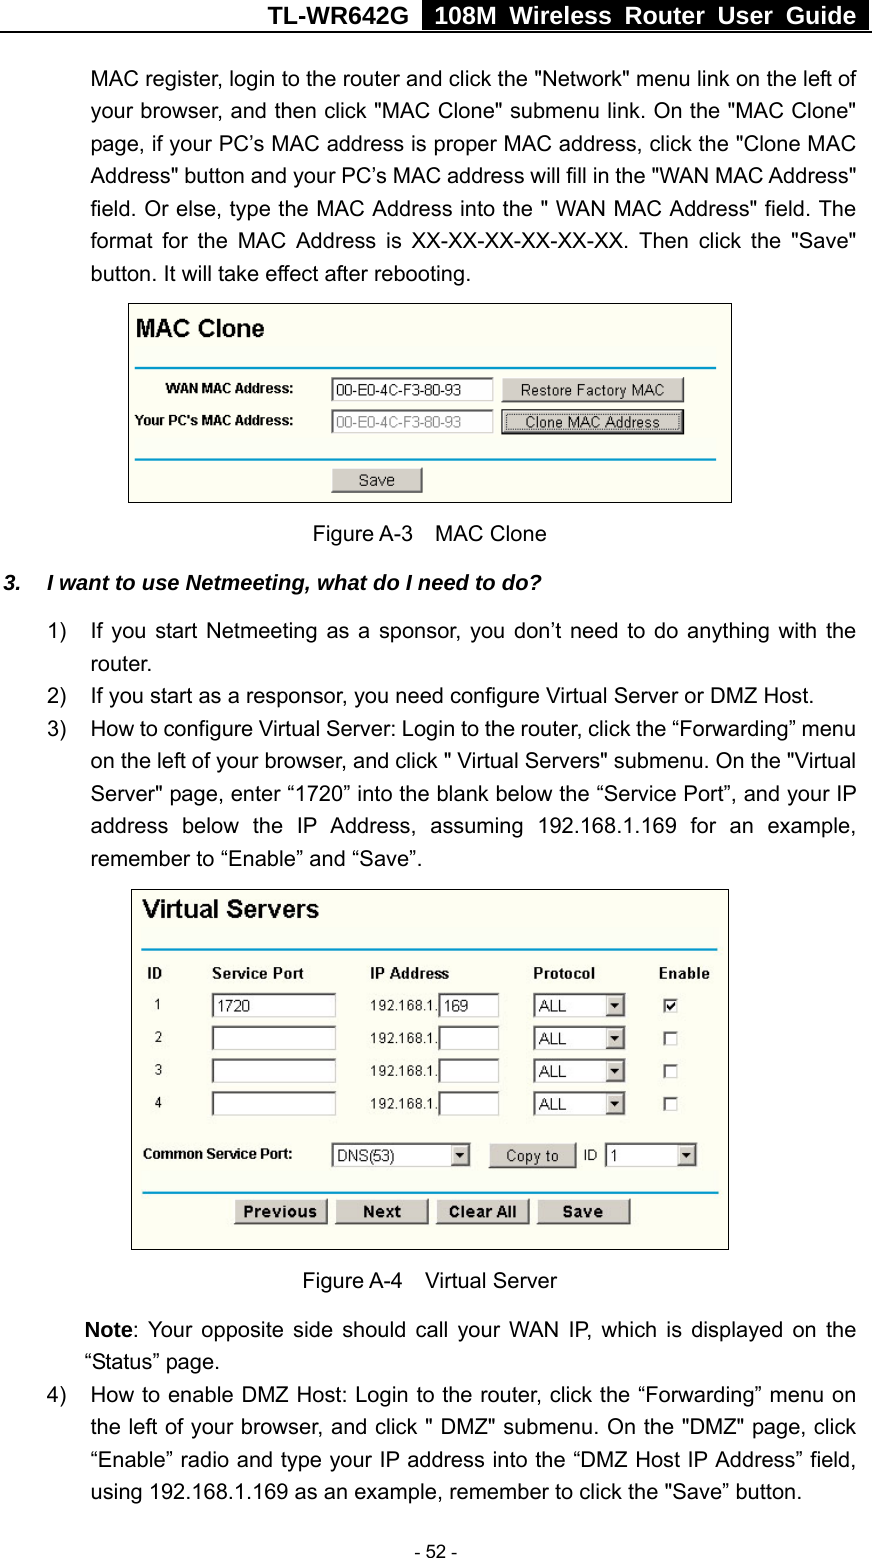 TL-WR642G   108M Wireless Router User Guide   - 52 - MAC register, login to the router and click the &quot;Network&quot; menu link on the left of your browser, and then click &quot;MAC Clone&quot; submenu link. On the &quot;MAC Clone&quot; page, if your PC’s MAC address is proper MAC address, click the &quot;Clone MAC Address&quot; button and your PC’s MAC address will fill in the &quot;WAN MAC Address&quot; field. Or else, type the MAC Address into the &quot; WAN MAC Address&quot; field. The format for the MAC Address is XX-XX-XX-XX-XX-XX. Then click the &quot;Save&quot; button. It will take effect after rebooting.  Figure A-3  MAC Clone 3.  I want to use Netmeeting, what do I need to do? 1)  If you start Netmeeting as a sponsor, you don’t need to do anything with the router. 2)  If you start as a responsor, you need configure Virtual Server or DMZ Host. 3)  How to configure Virtual Server: Login to the router, click the “Forwarding” menu on the left of your browser, and click &quot; Virtual Servers&quot; submenu. On the &quot;Virtual Server&quot; page, enter “1720” into the blank below the “Service Port”, and your IP address below the IP Address, assuming 192.168.1.169 for an example, remember to “Enable” and “Save”.    Figure A-4  Virtual Server Note: Your opposite side should call your WAN IP, which is displayed on the “Status” page. 4)  How to enable DMZ Host: Login to the router, click the “Forwarding” menu on the left of your browser, and click &quot; DMZ&quot; submenu. On the &quot;DMZ&quot; page, click “Enable” radio and type your IP address into the “DMZ Host IP Address” field, using 192.168.1.169 as an example, remember to click the &quot;Save” button.   